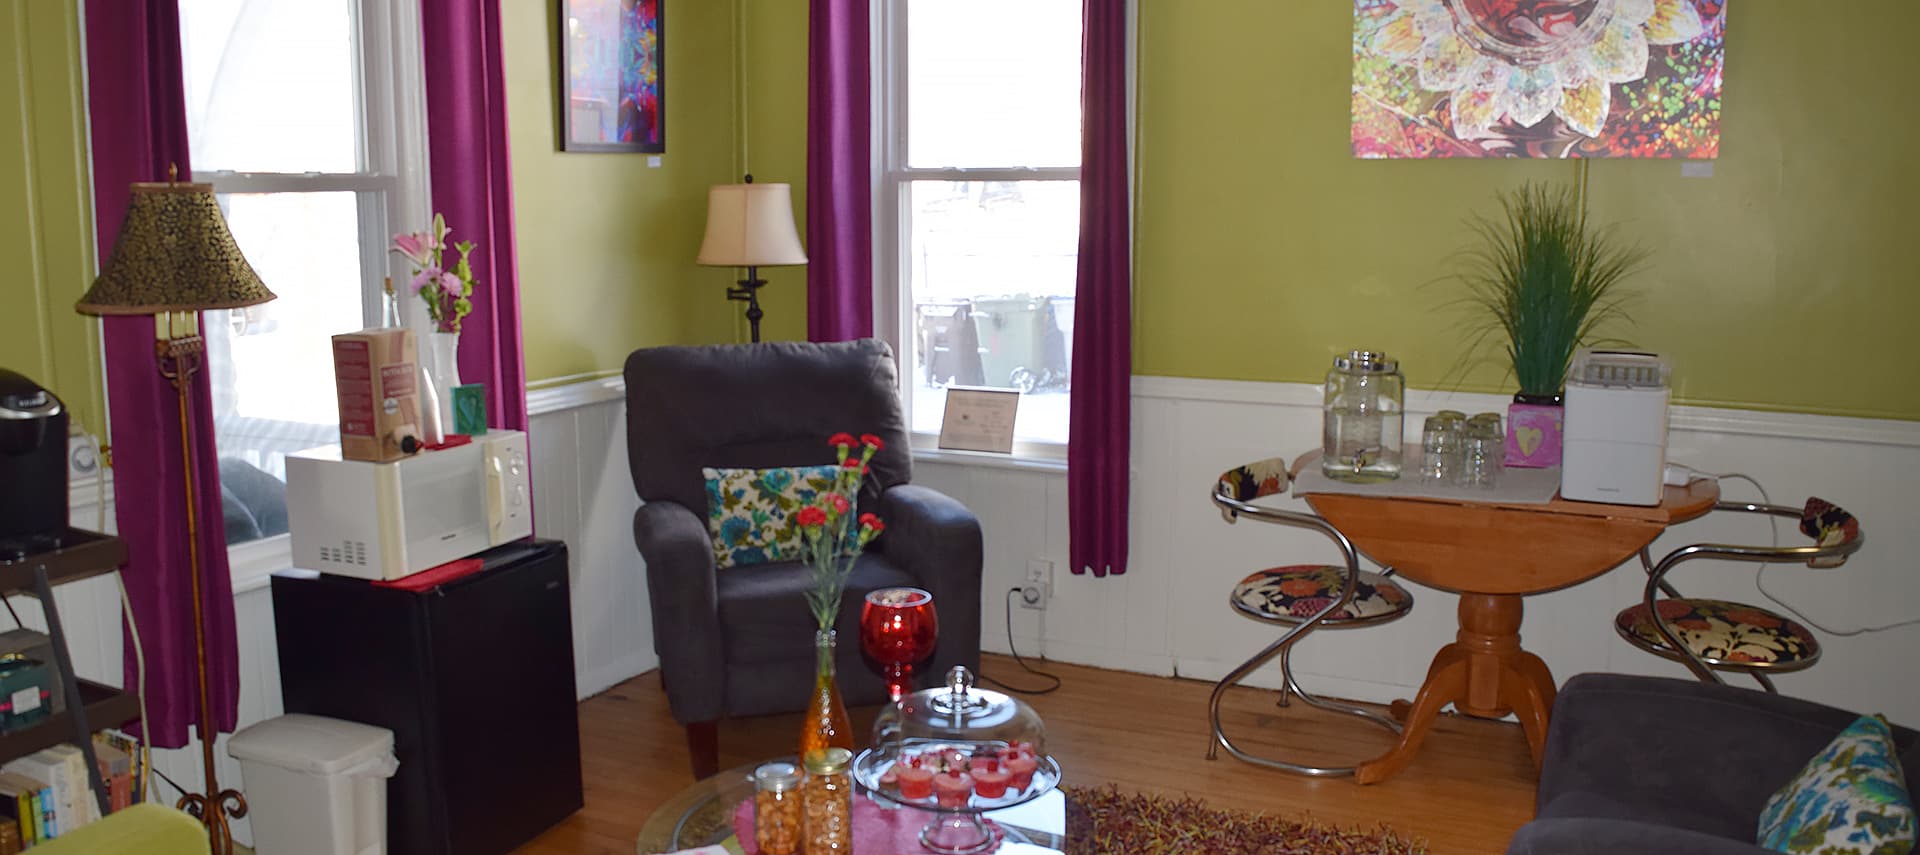 Lounge with bright green walls, large windows with purple curtains, eclectic furniture including an upholstered purple chair, lamps, a coffee table, and a small table with two chairs.